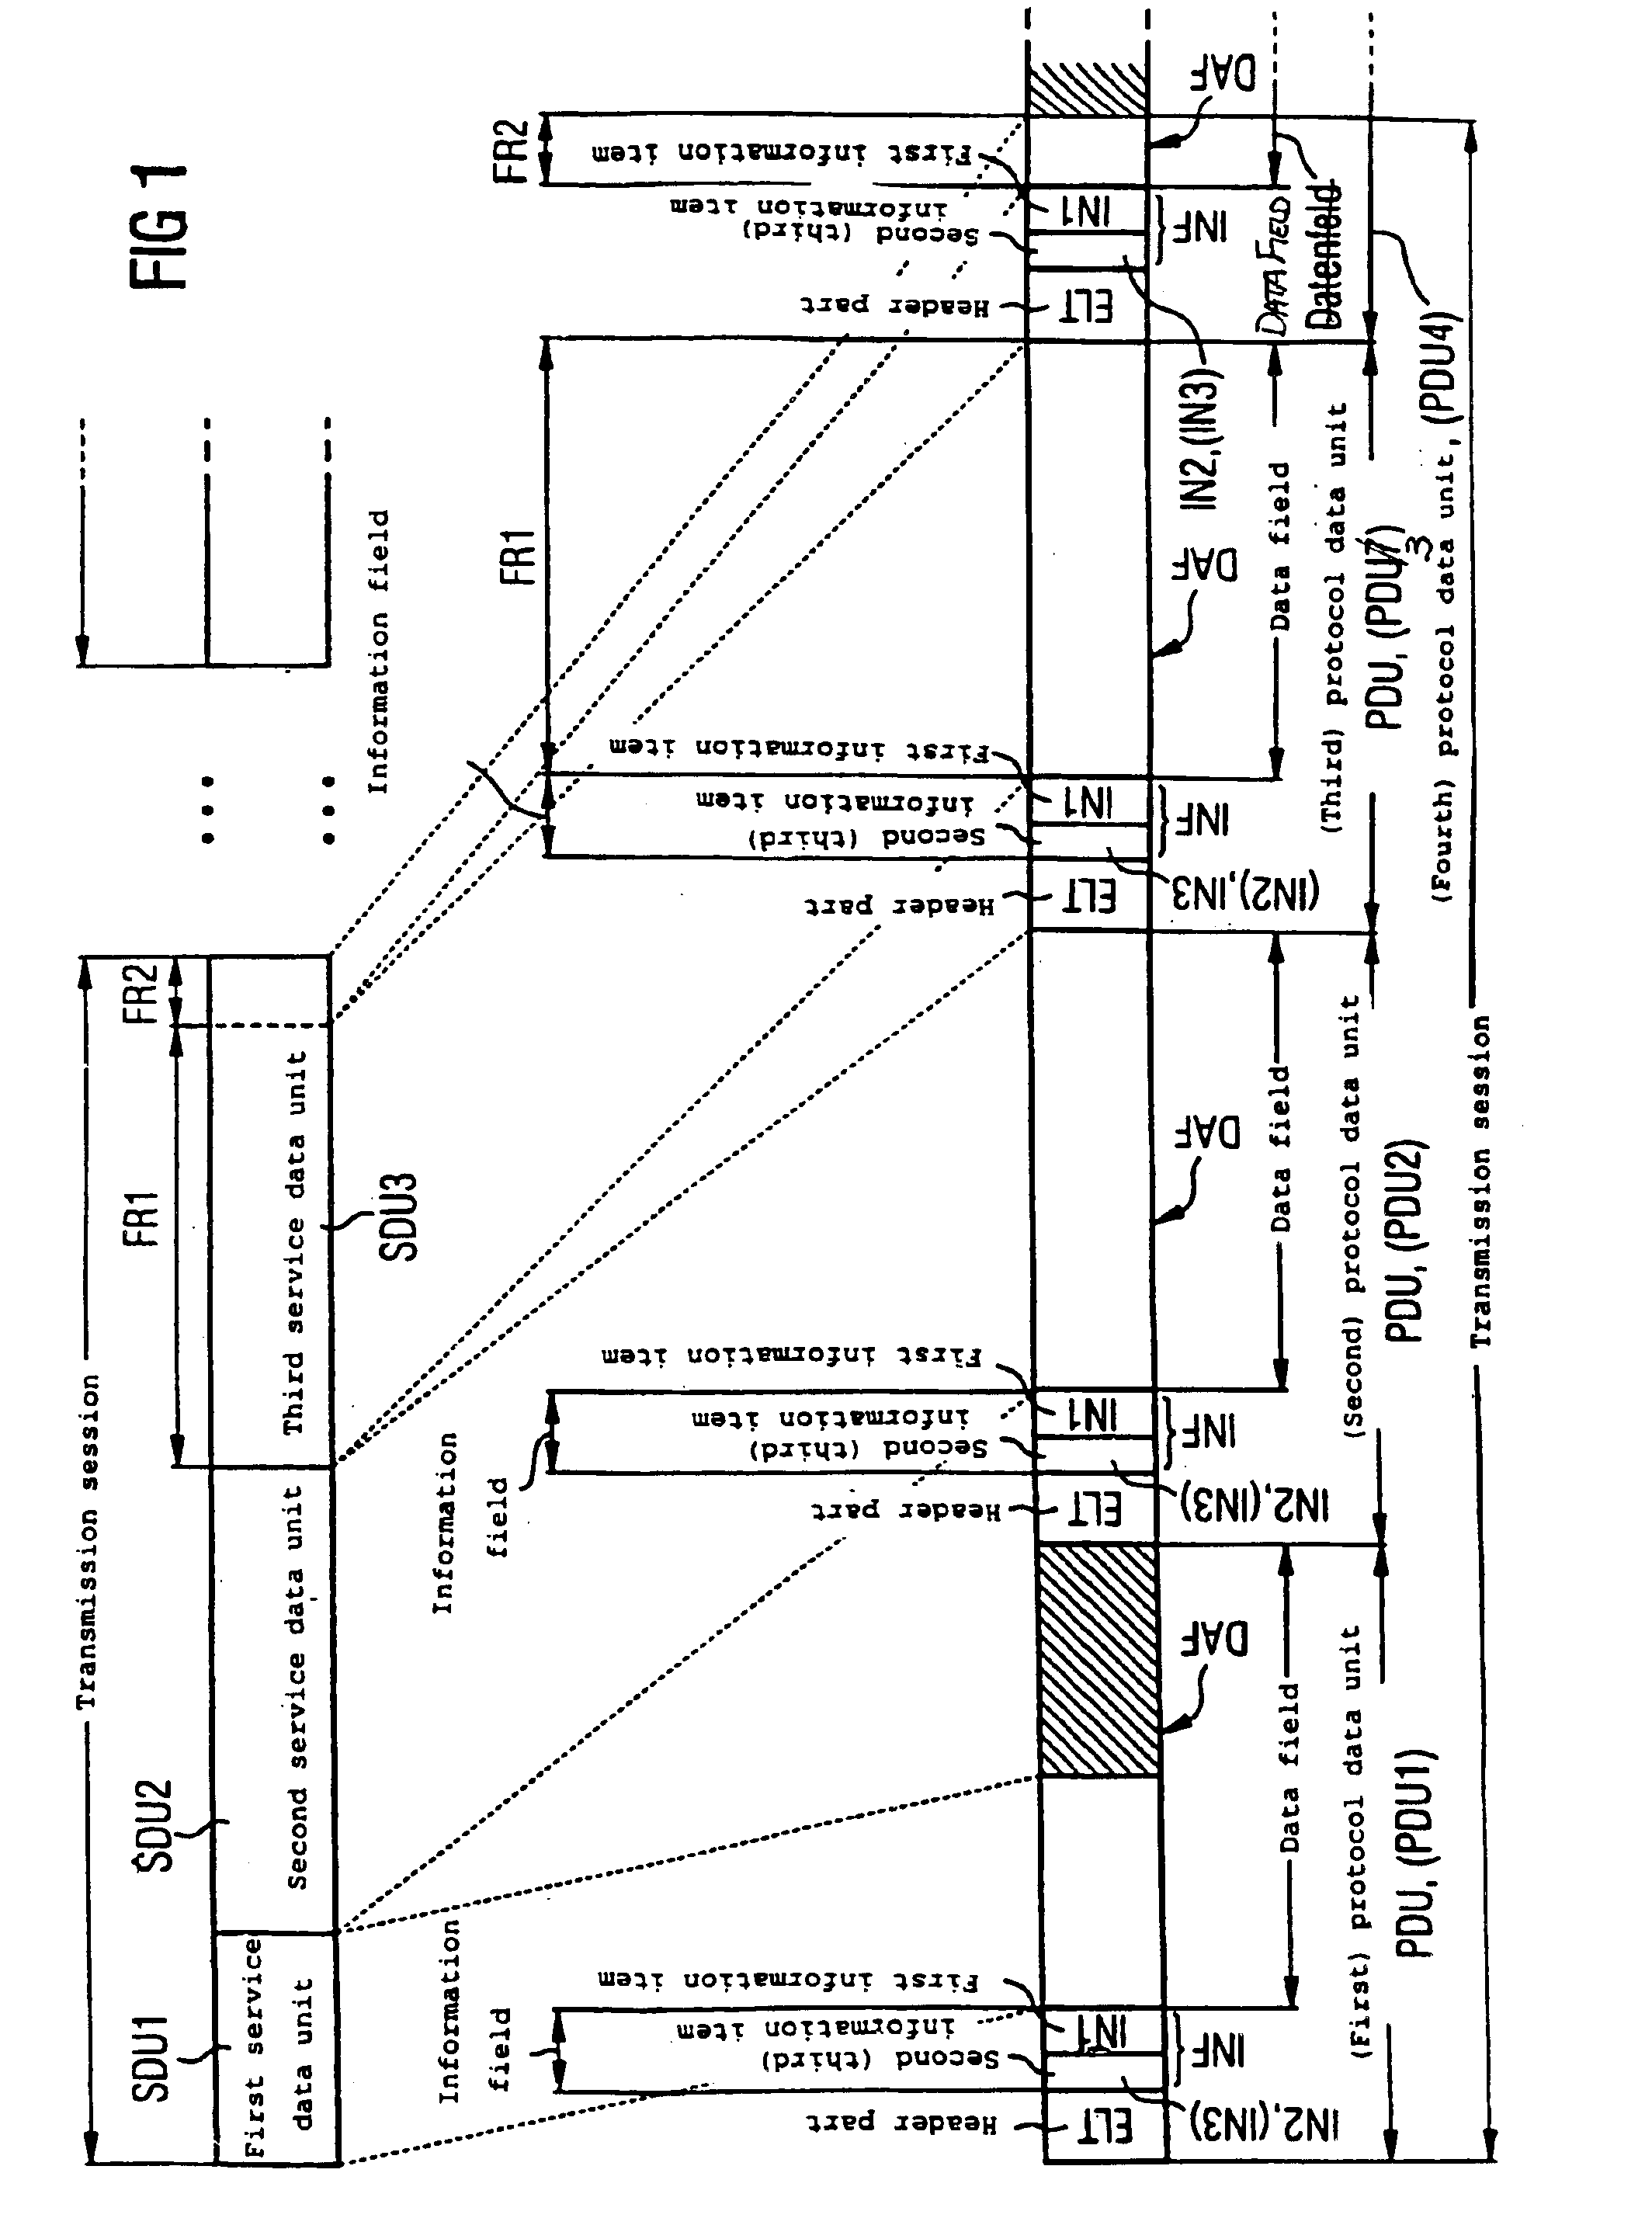 Method for transmitting service data in telecommunication systems with wireless telecommunication based on a predefined radio interface protocol between telecommunication devices, especially voice data and/or packet data in dect systems